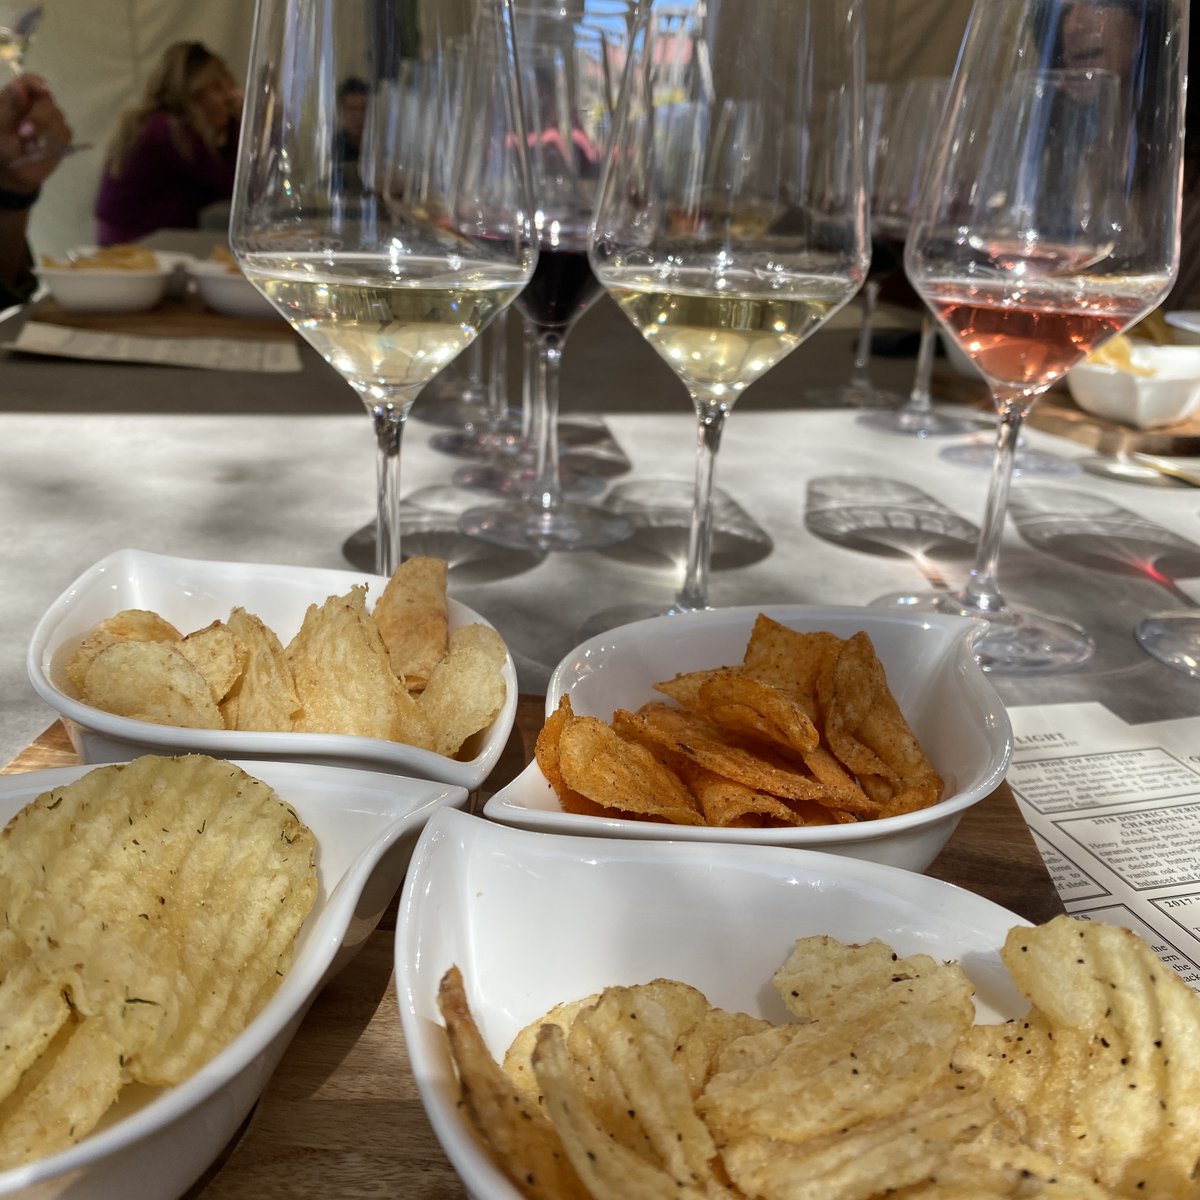 It’s a good morning when you start with all these glasses. And chips!  

#winecountrydetours #discovernapa #outdoorwinetasting #napavalley #sonoma #napawines #sonomawines #winepairing